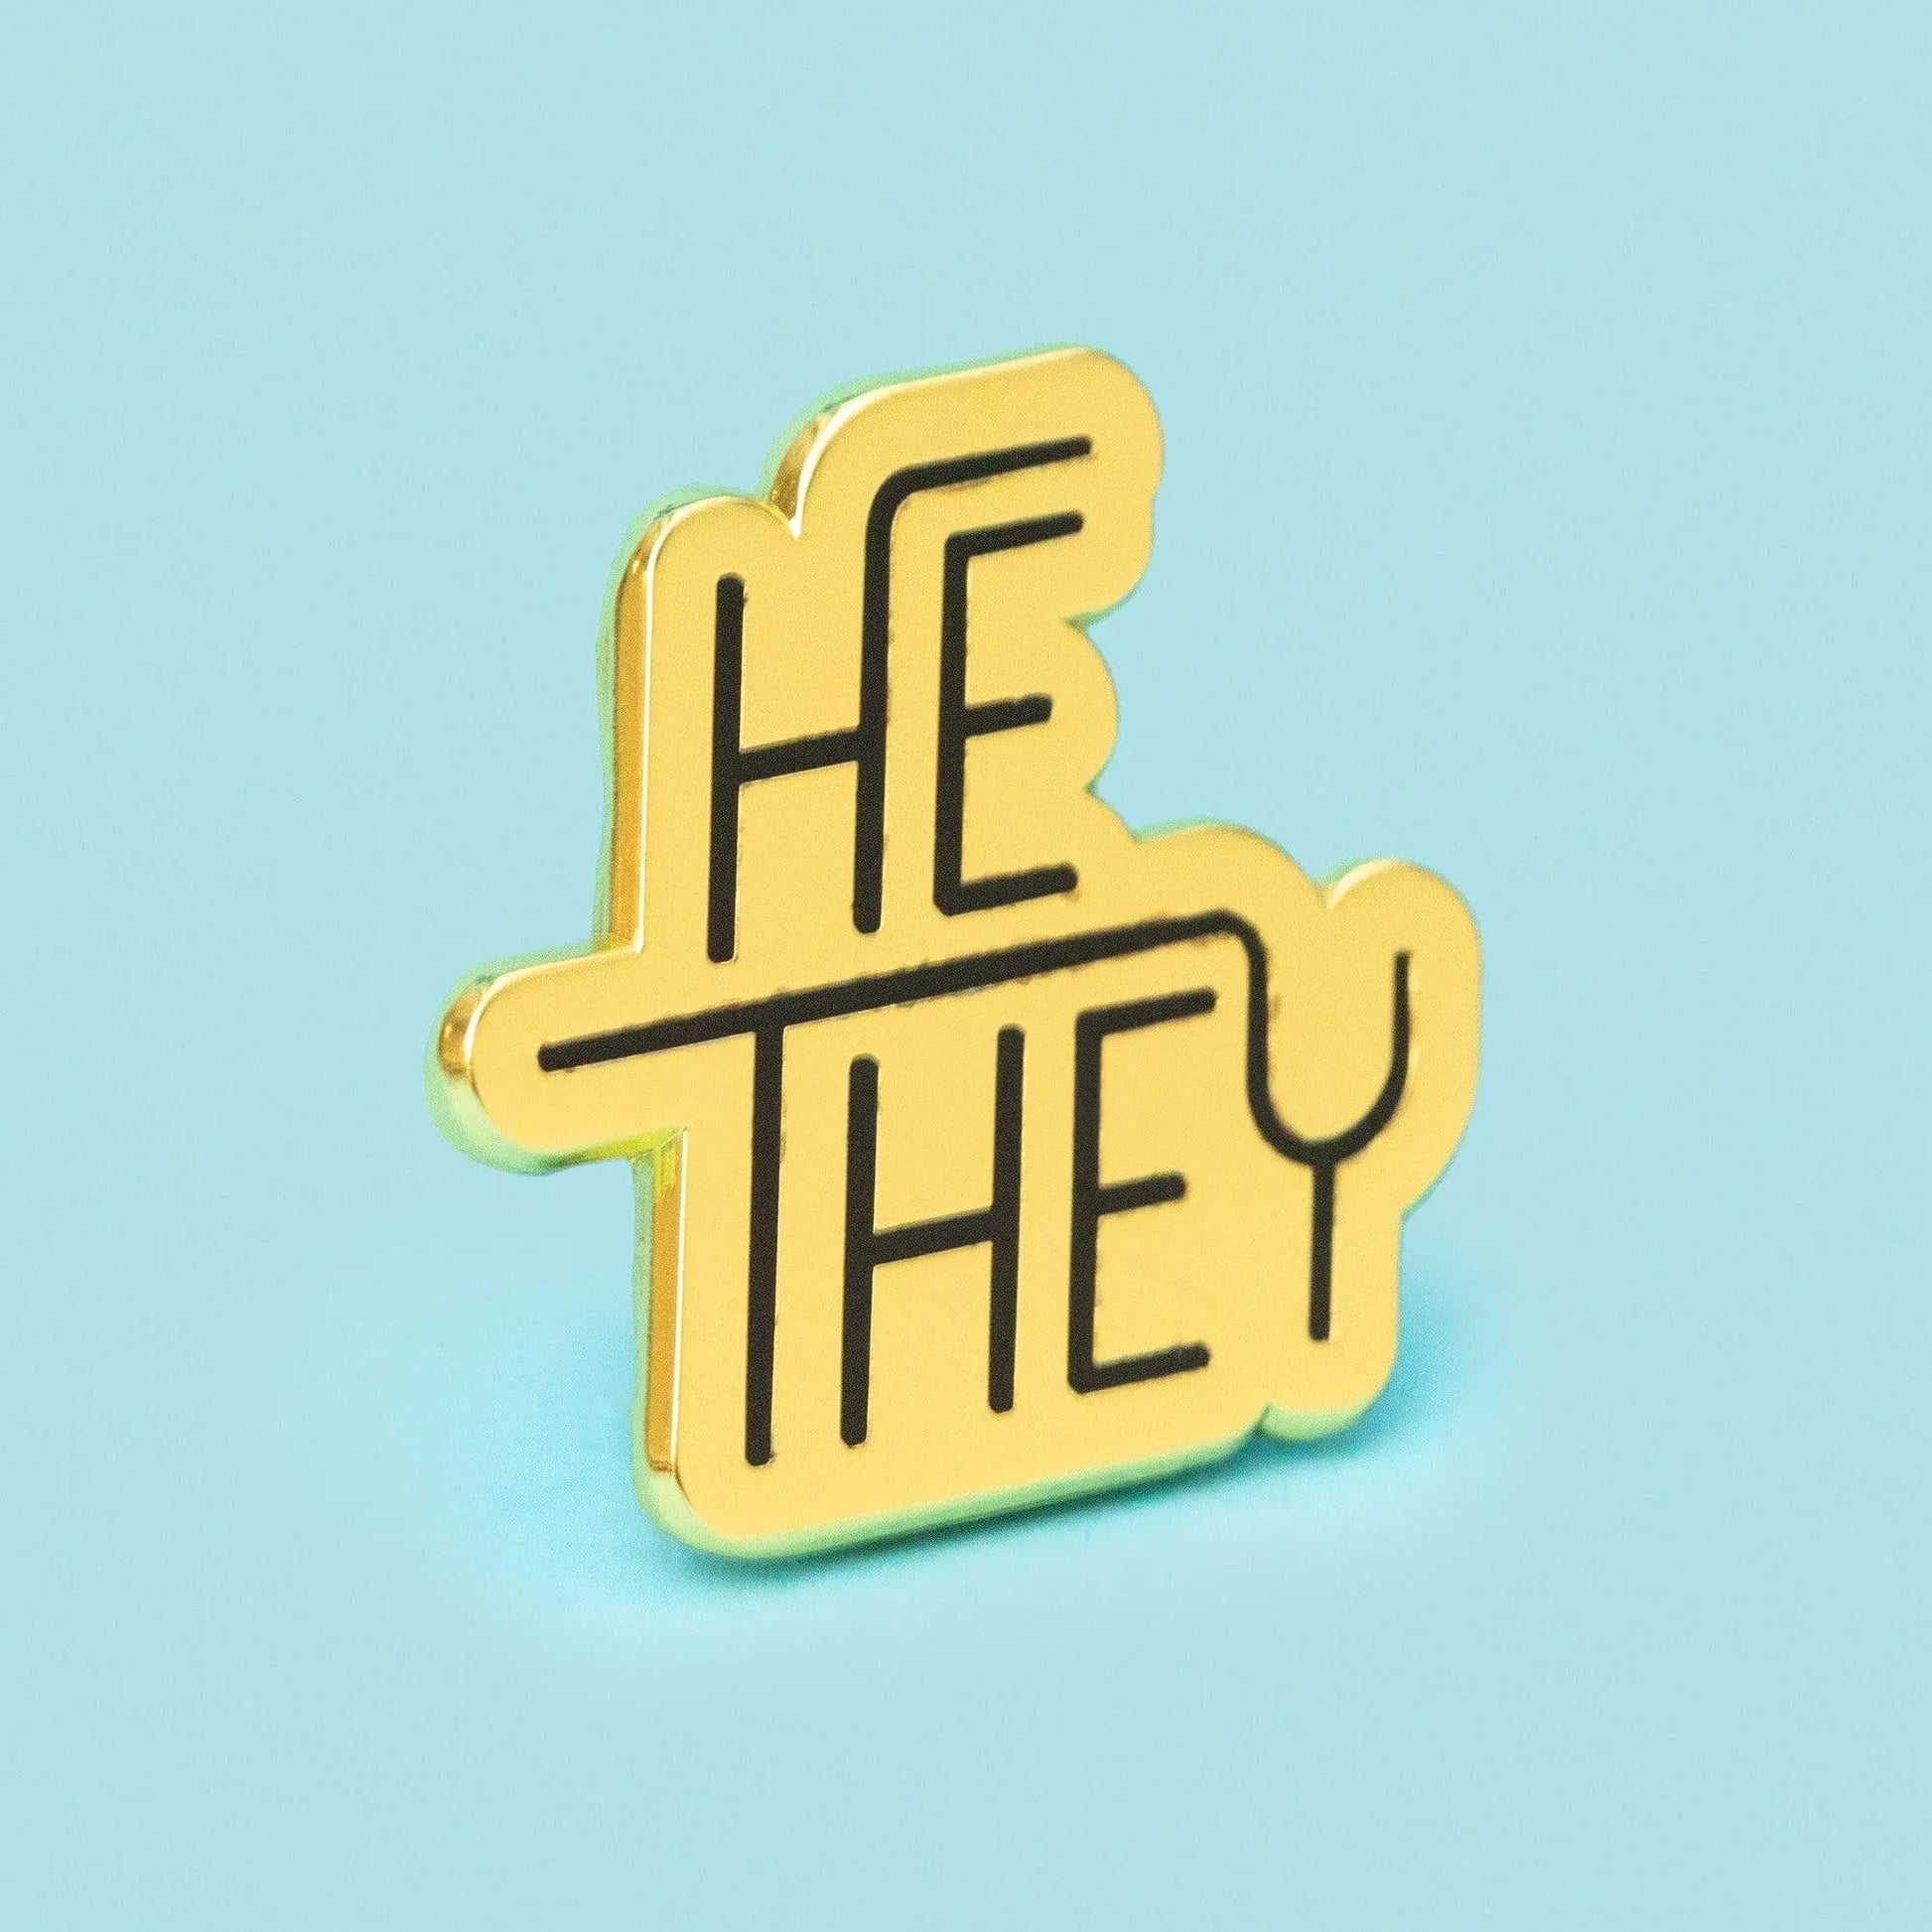 Introduce yourself with these Pronoun Pins! These little pins are perfect for your lapel, bag, or jacket.